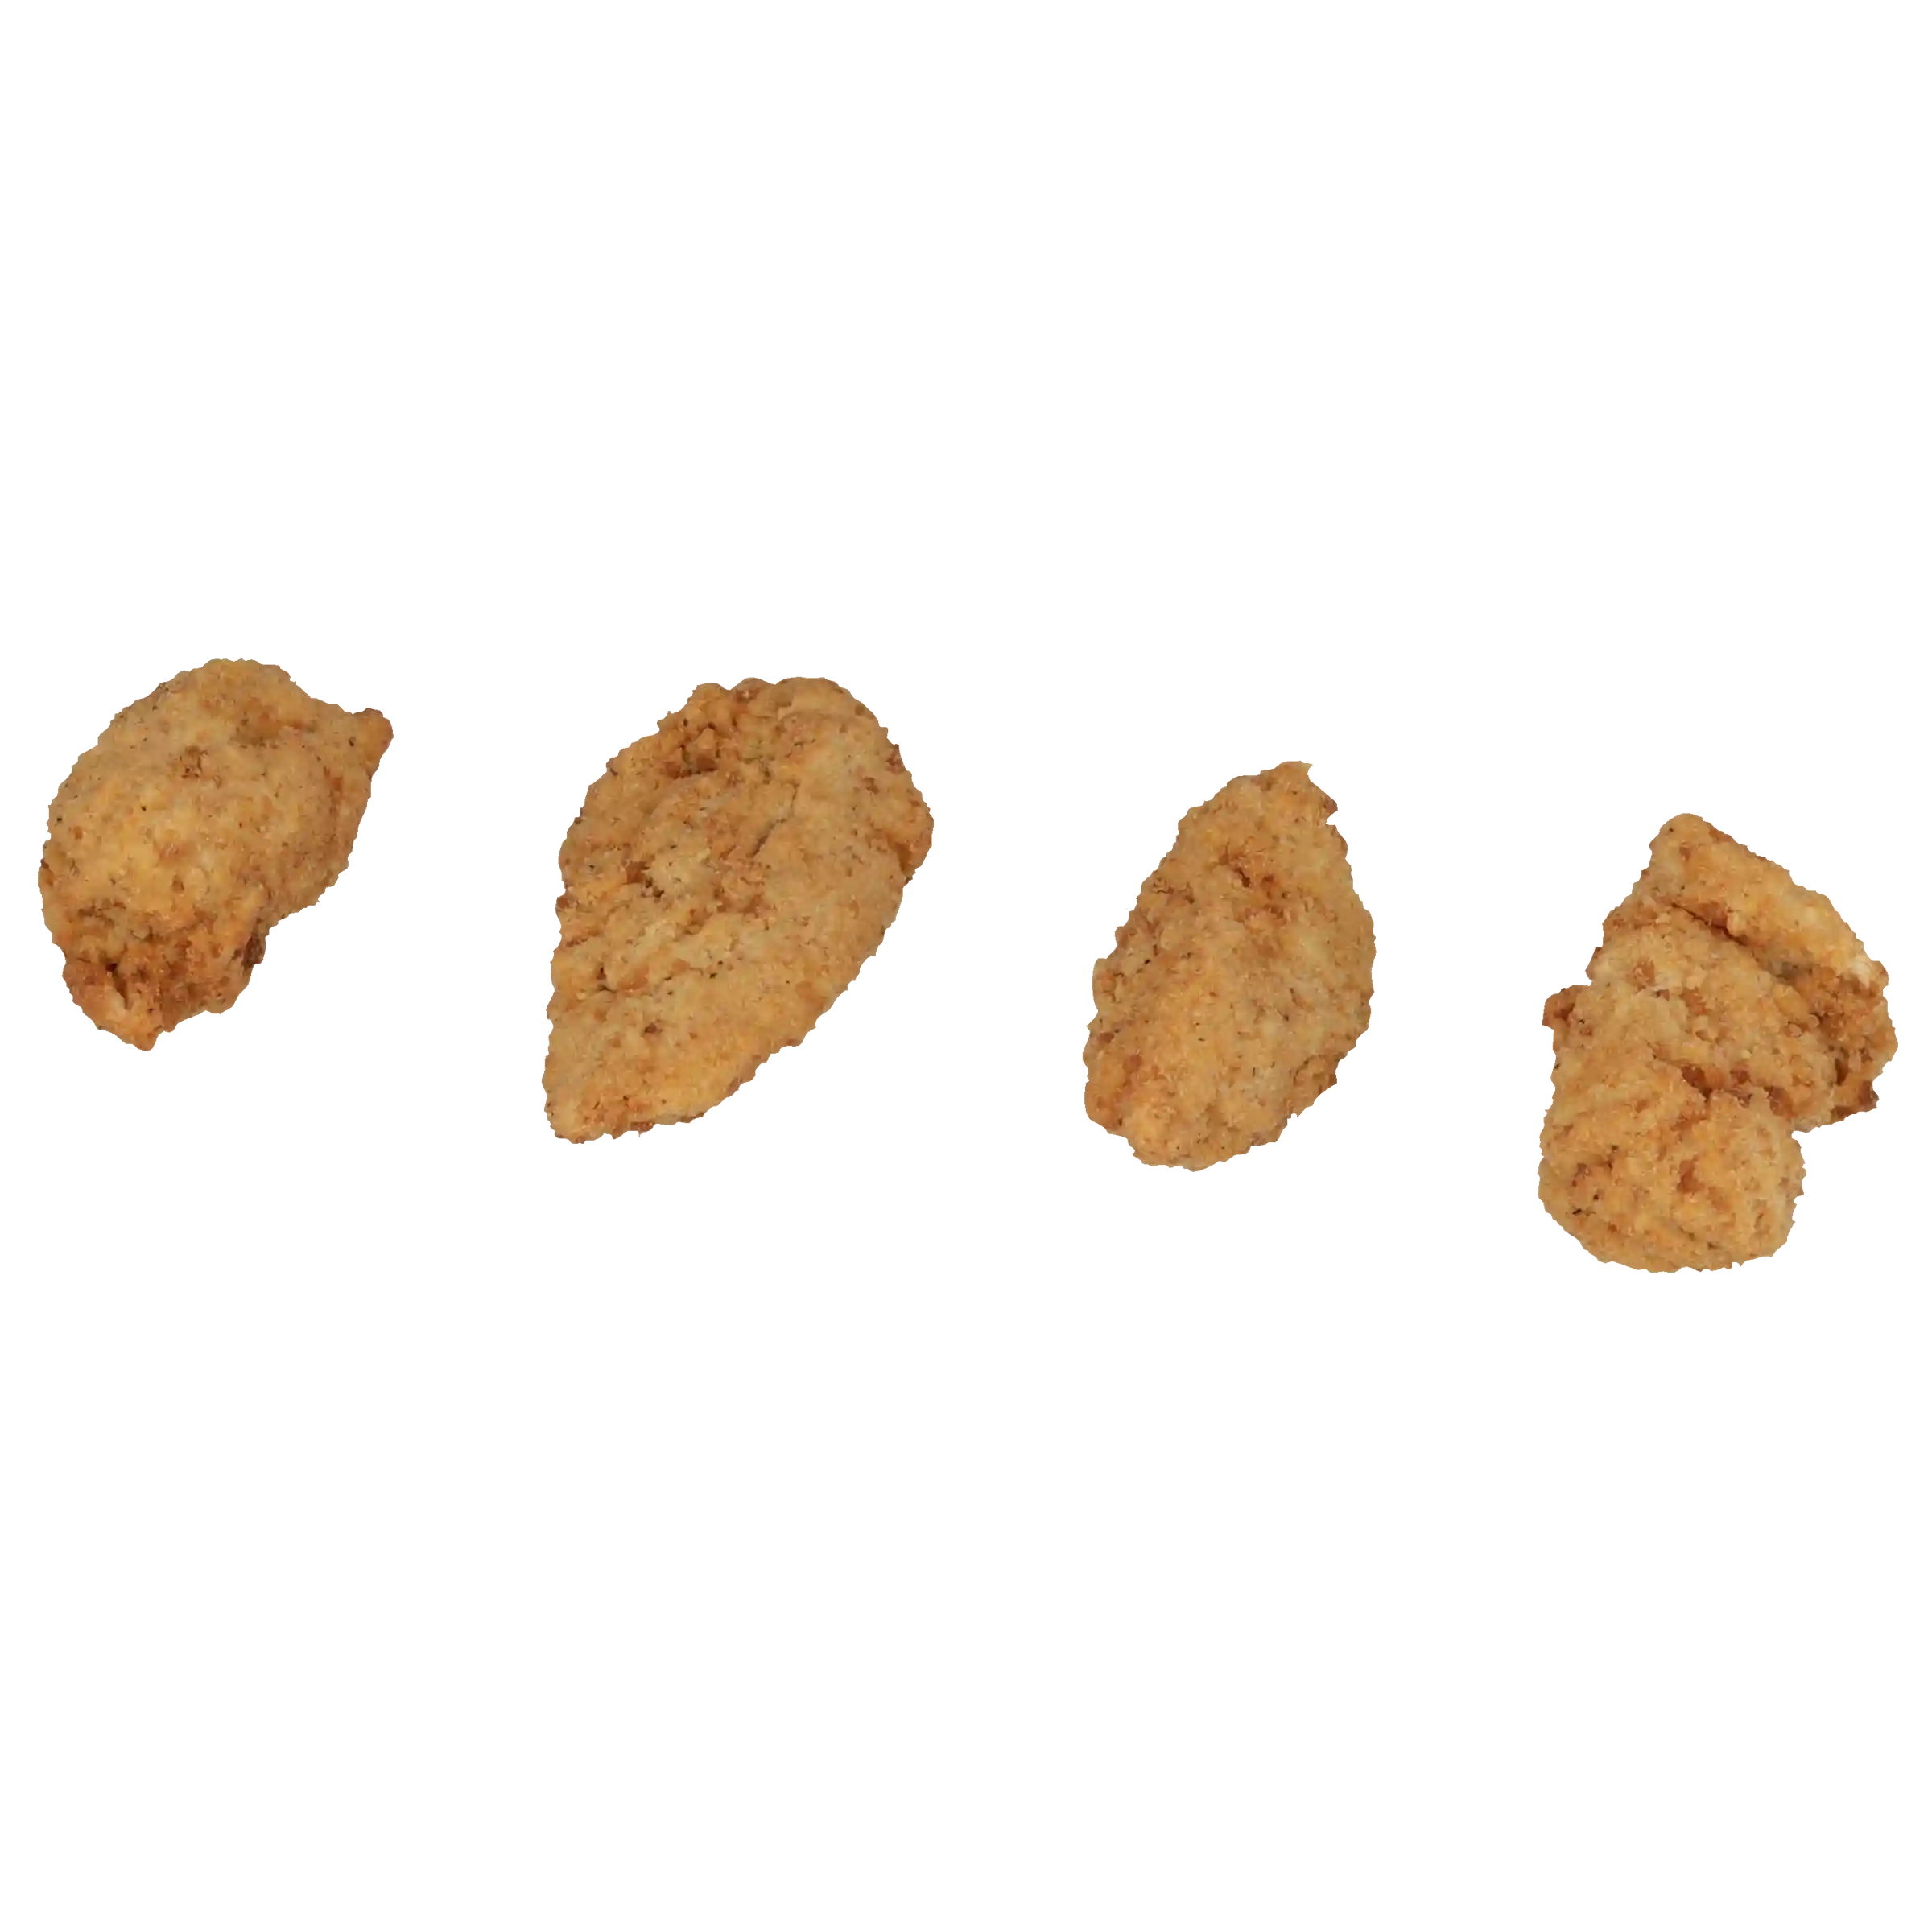 Tyson® Fully Cooked Whole Grain Breaded Homestyle Chicken Tenderloins _image_11